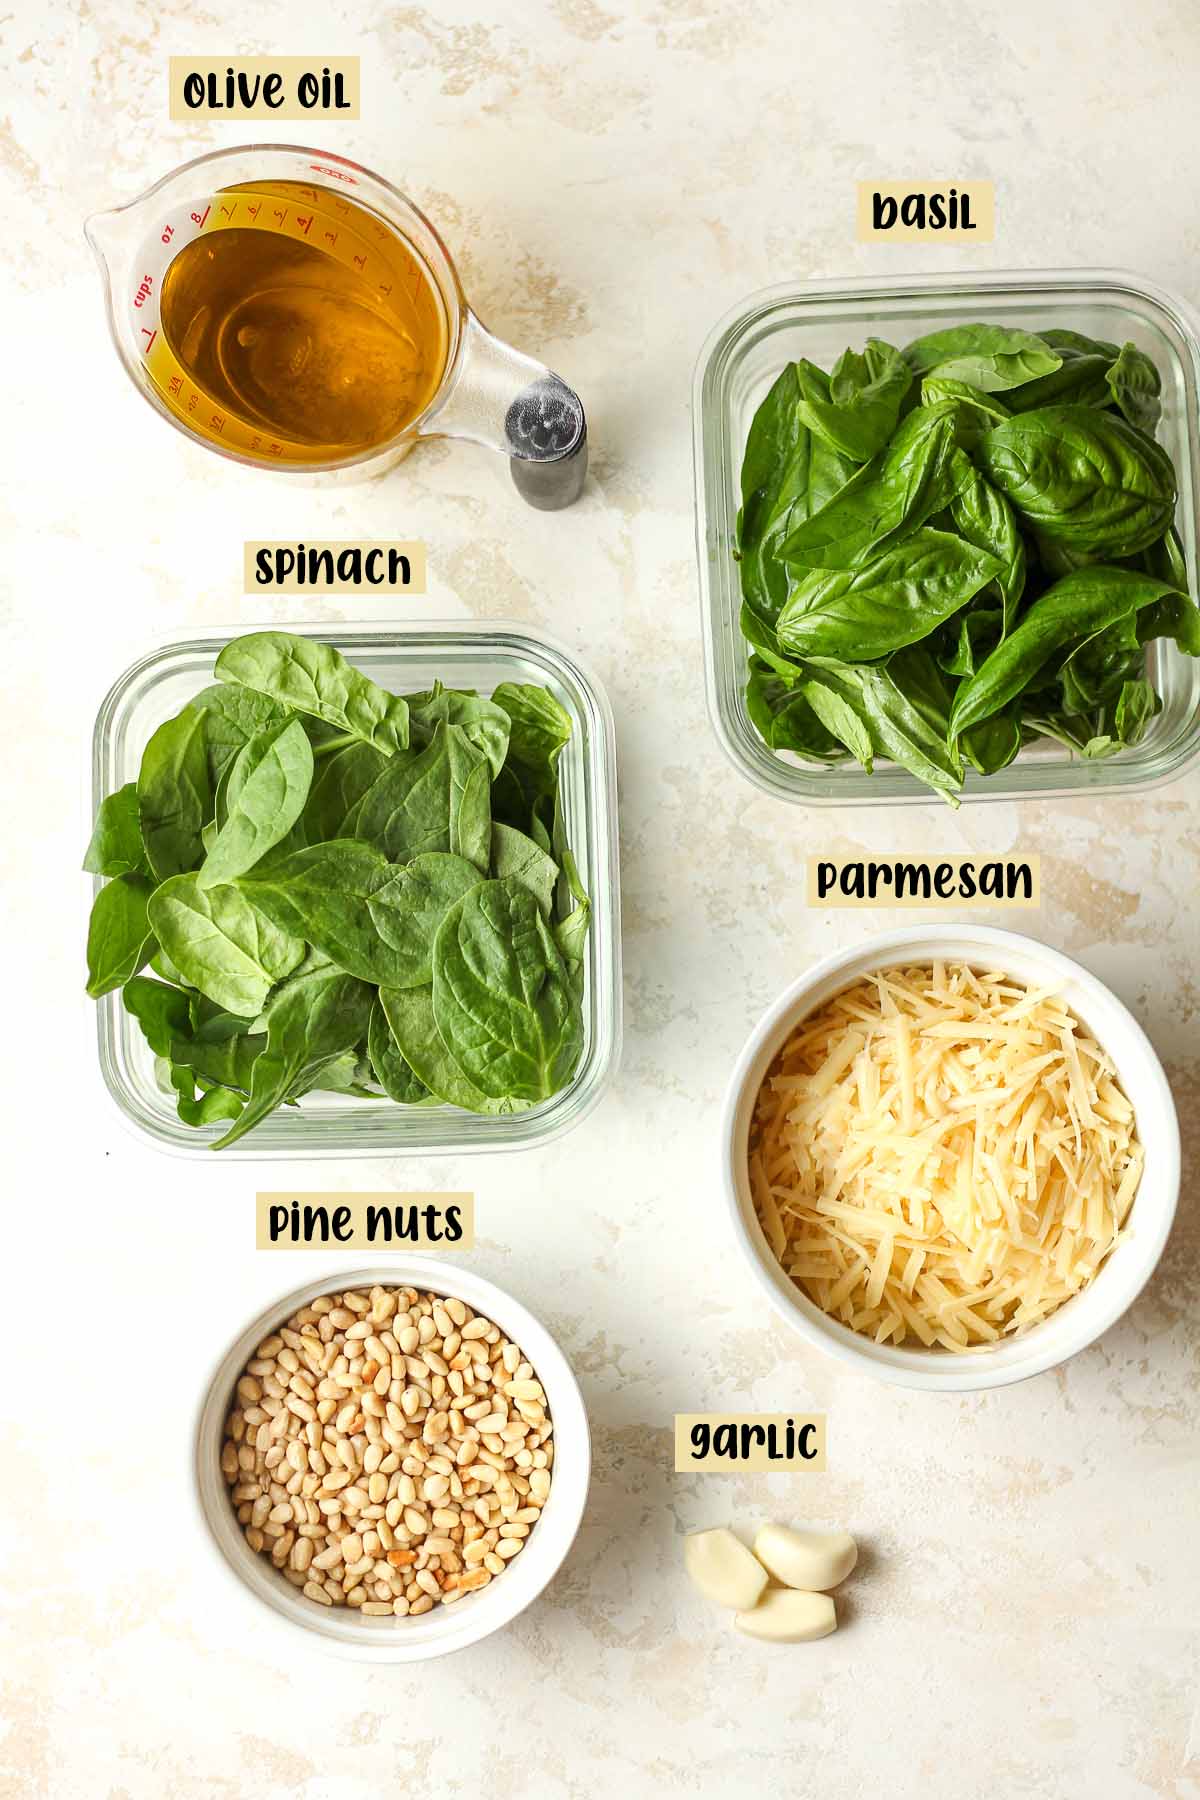 The labeled ingredients for spinach pesto.